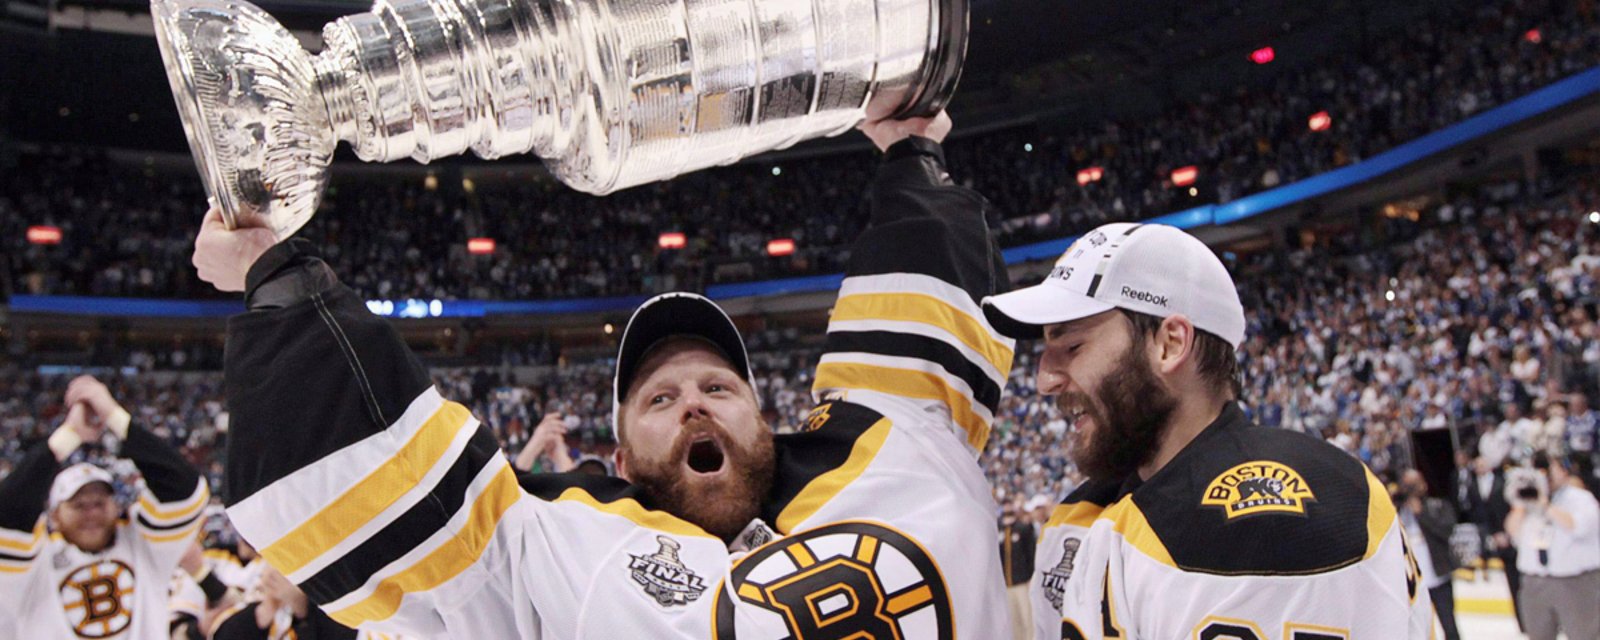 Report: Tim Thomas returns to Bruins organization for Game 7